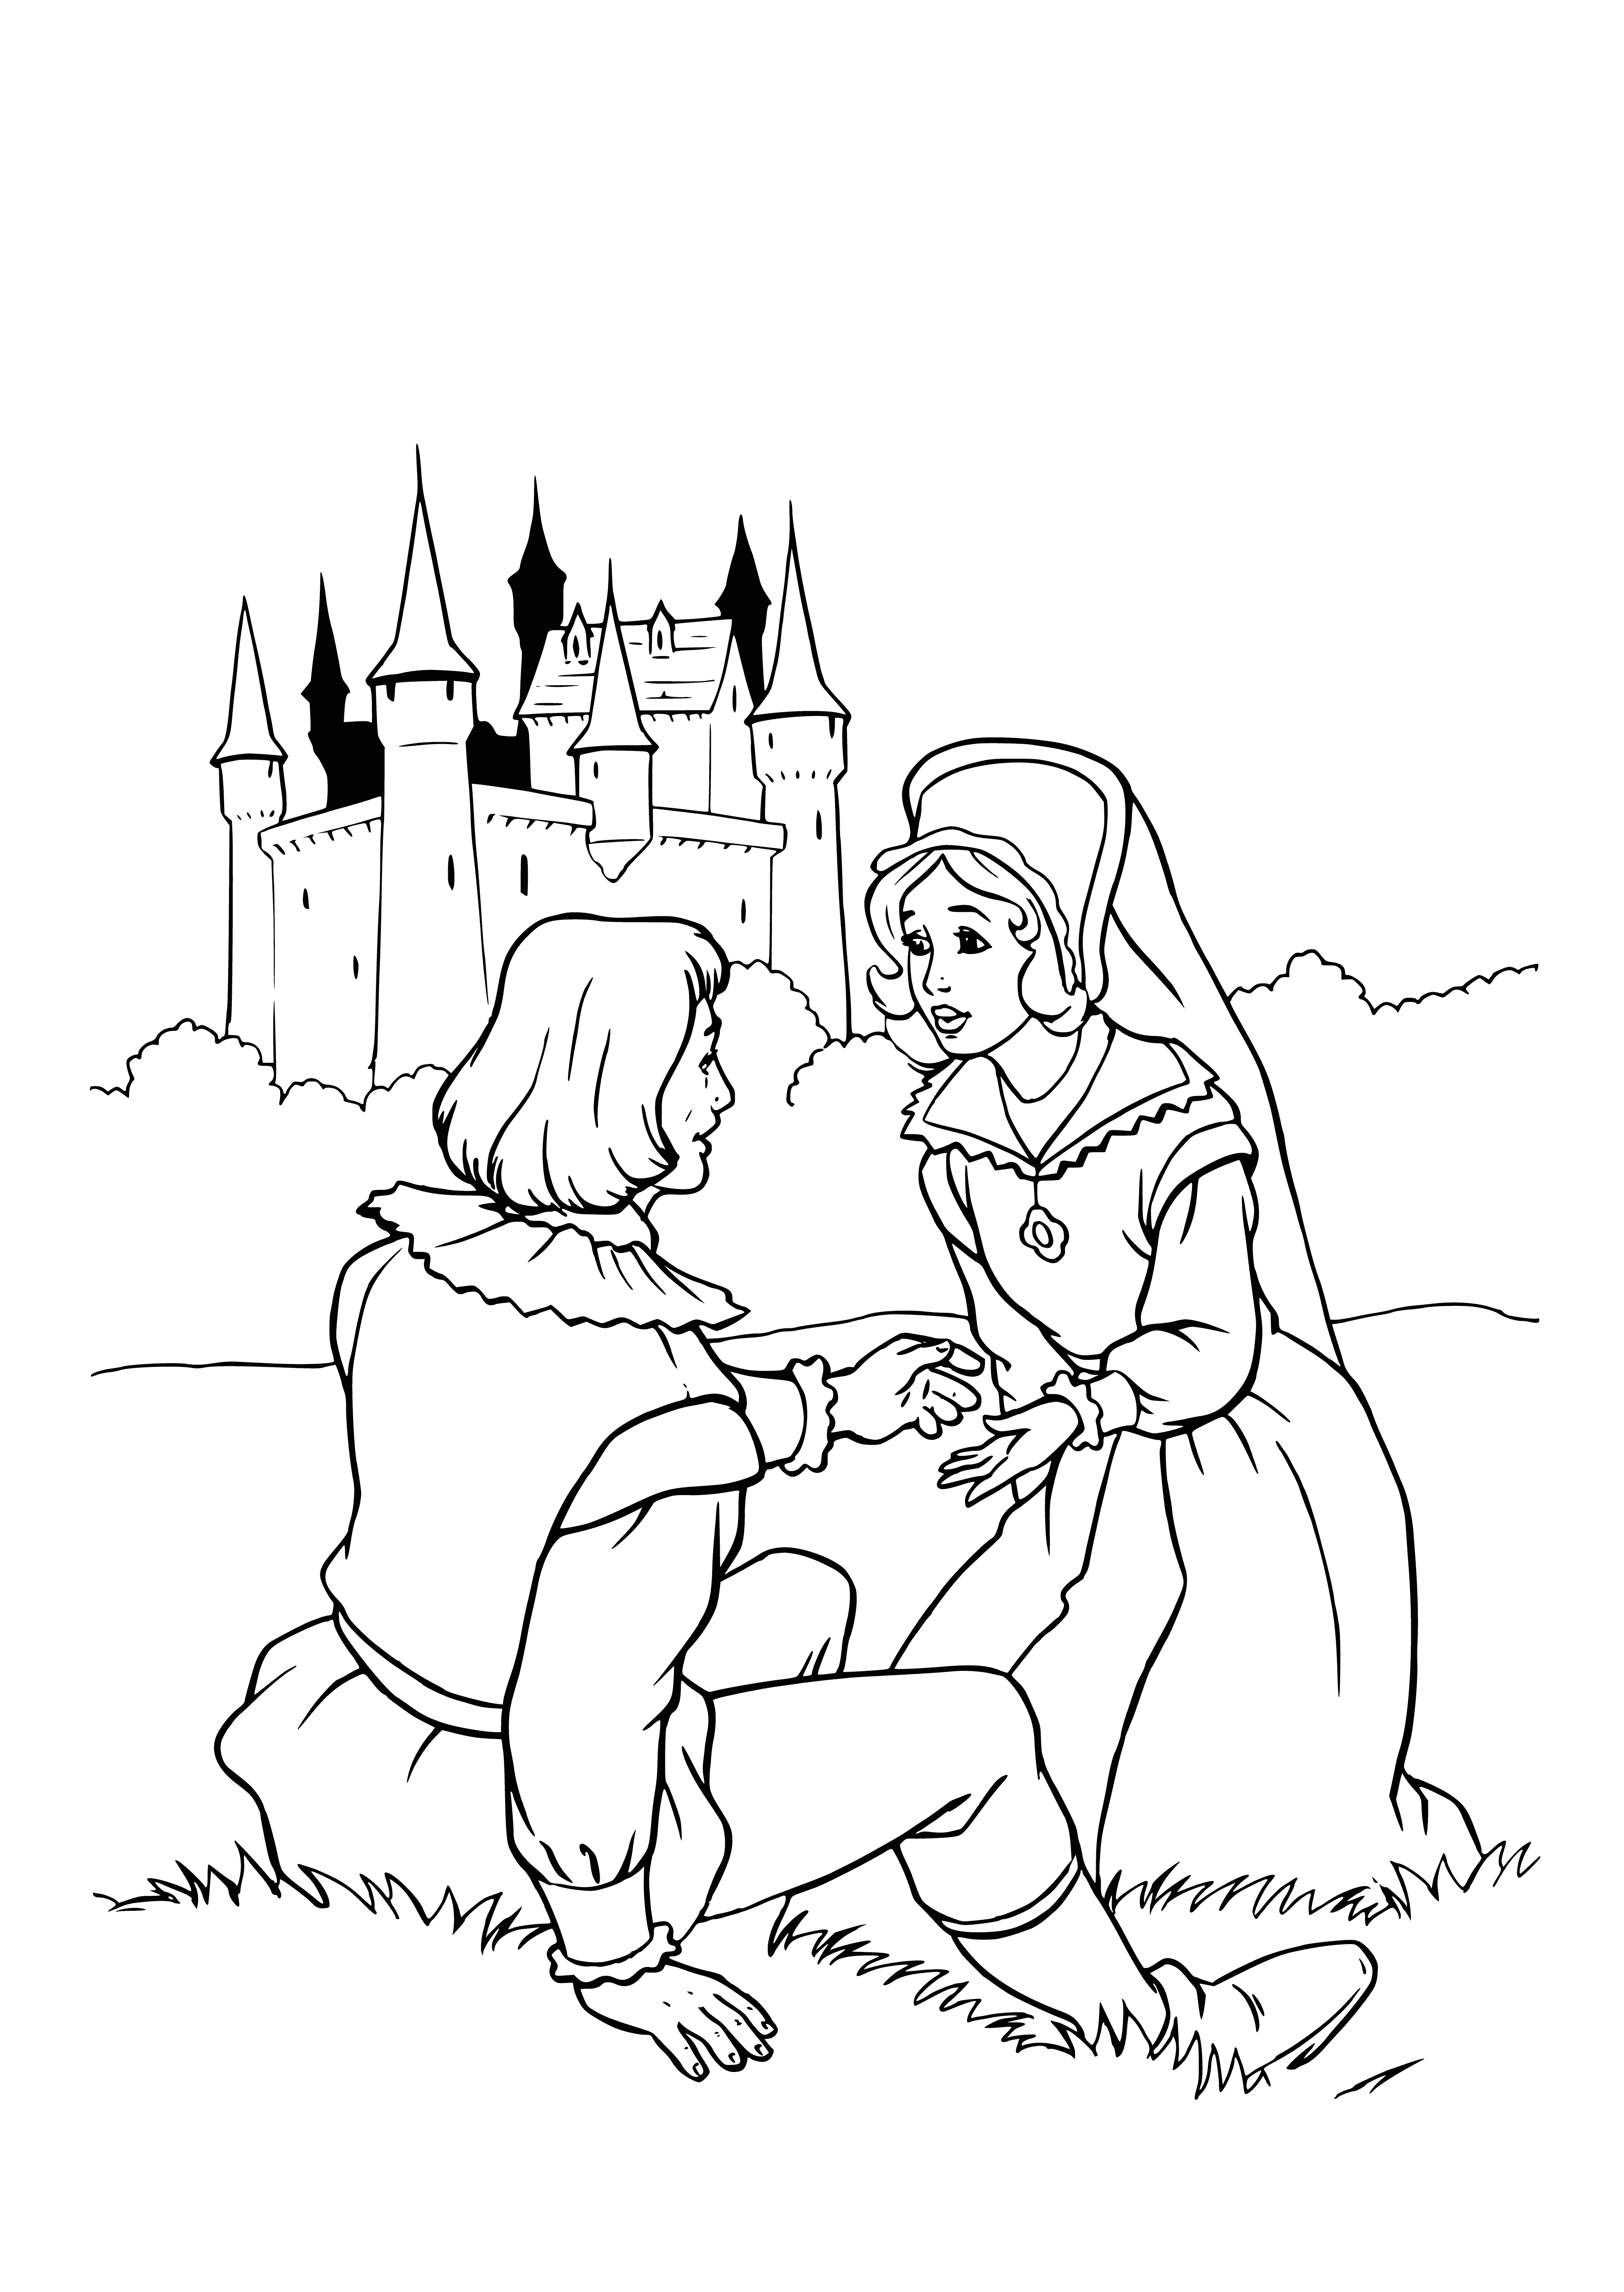 The beauty and the Beast coloring page